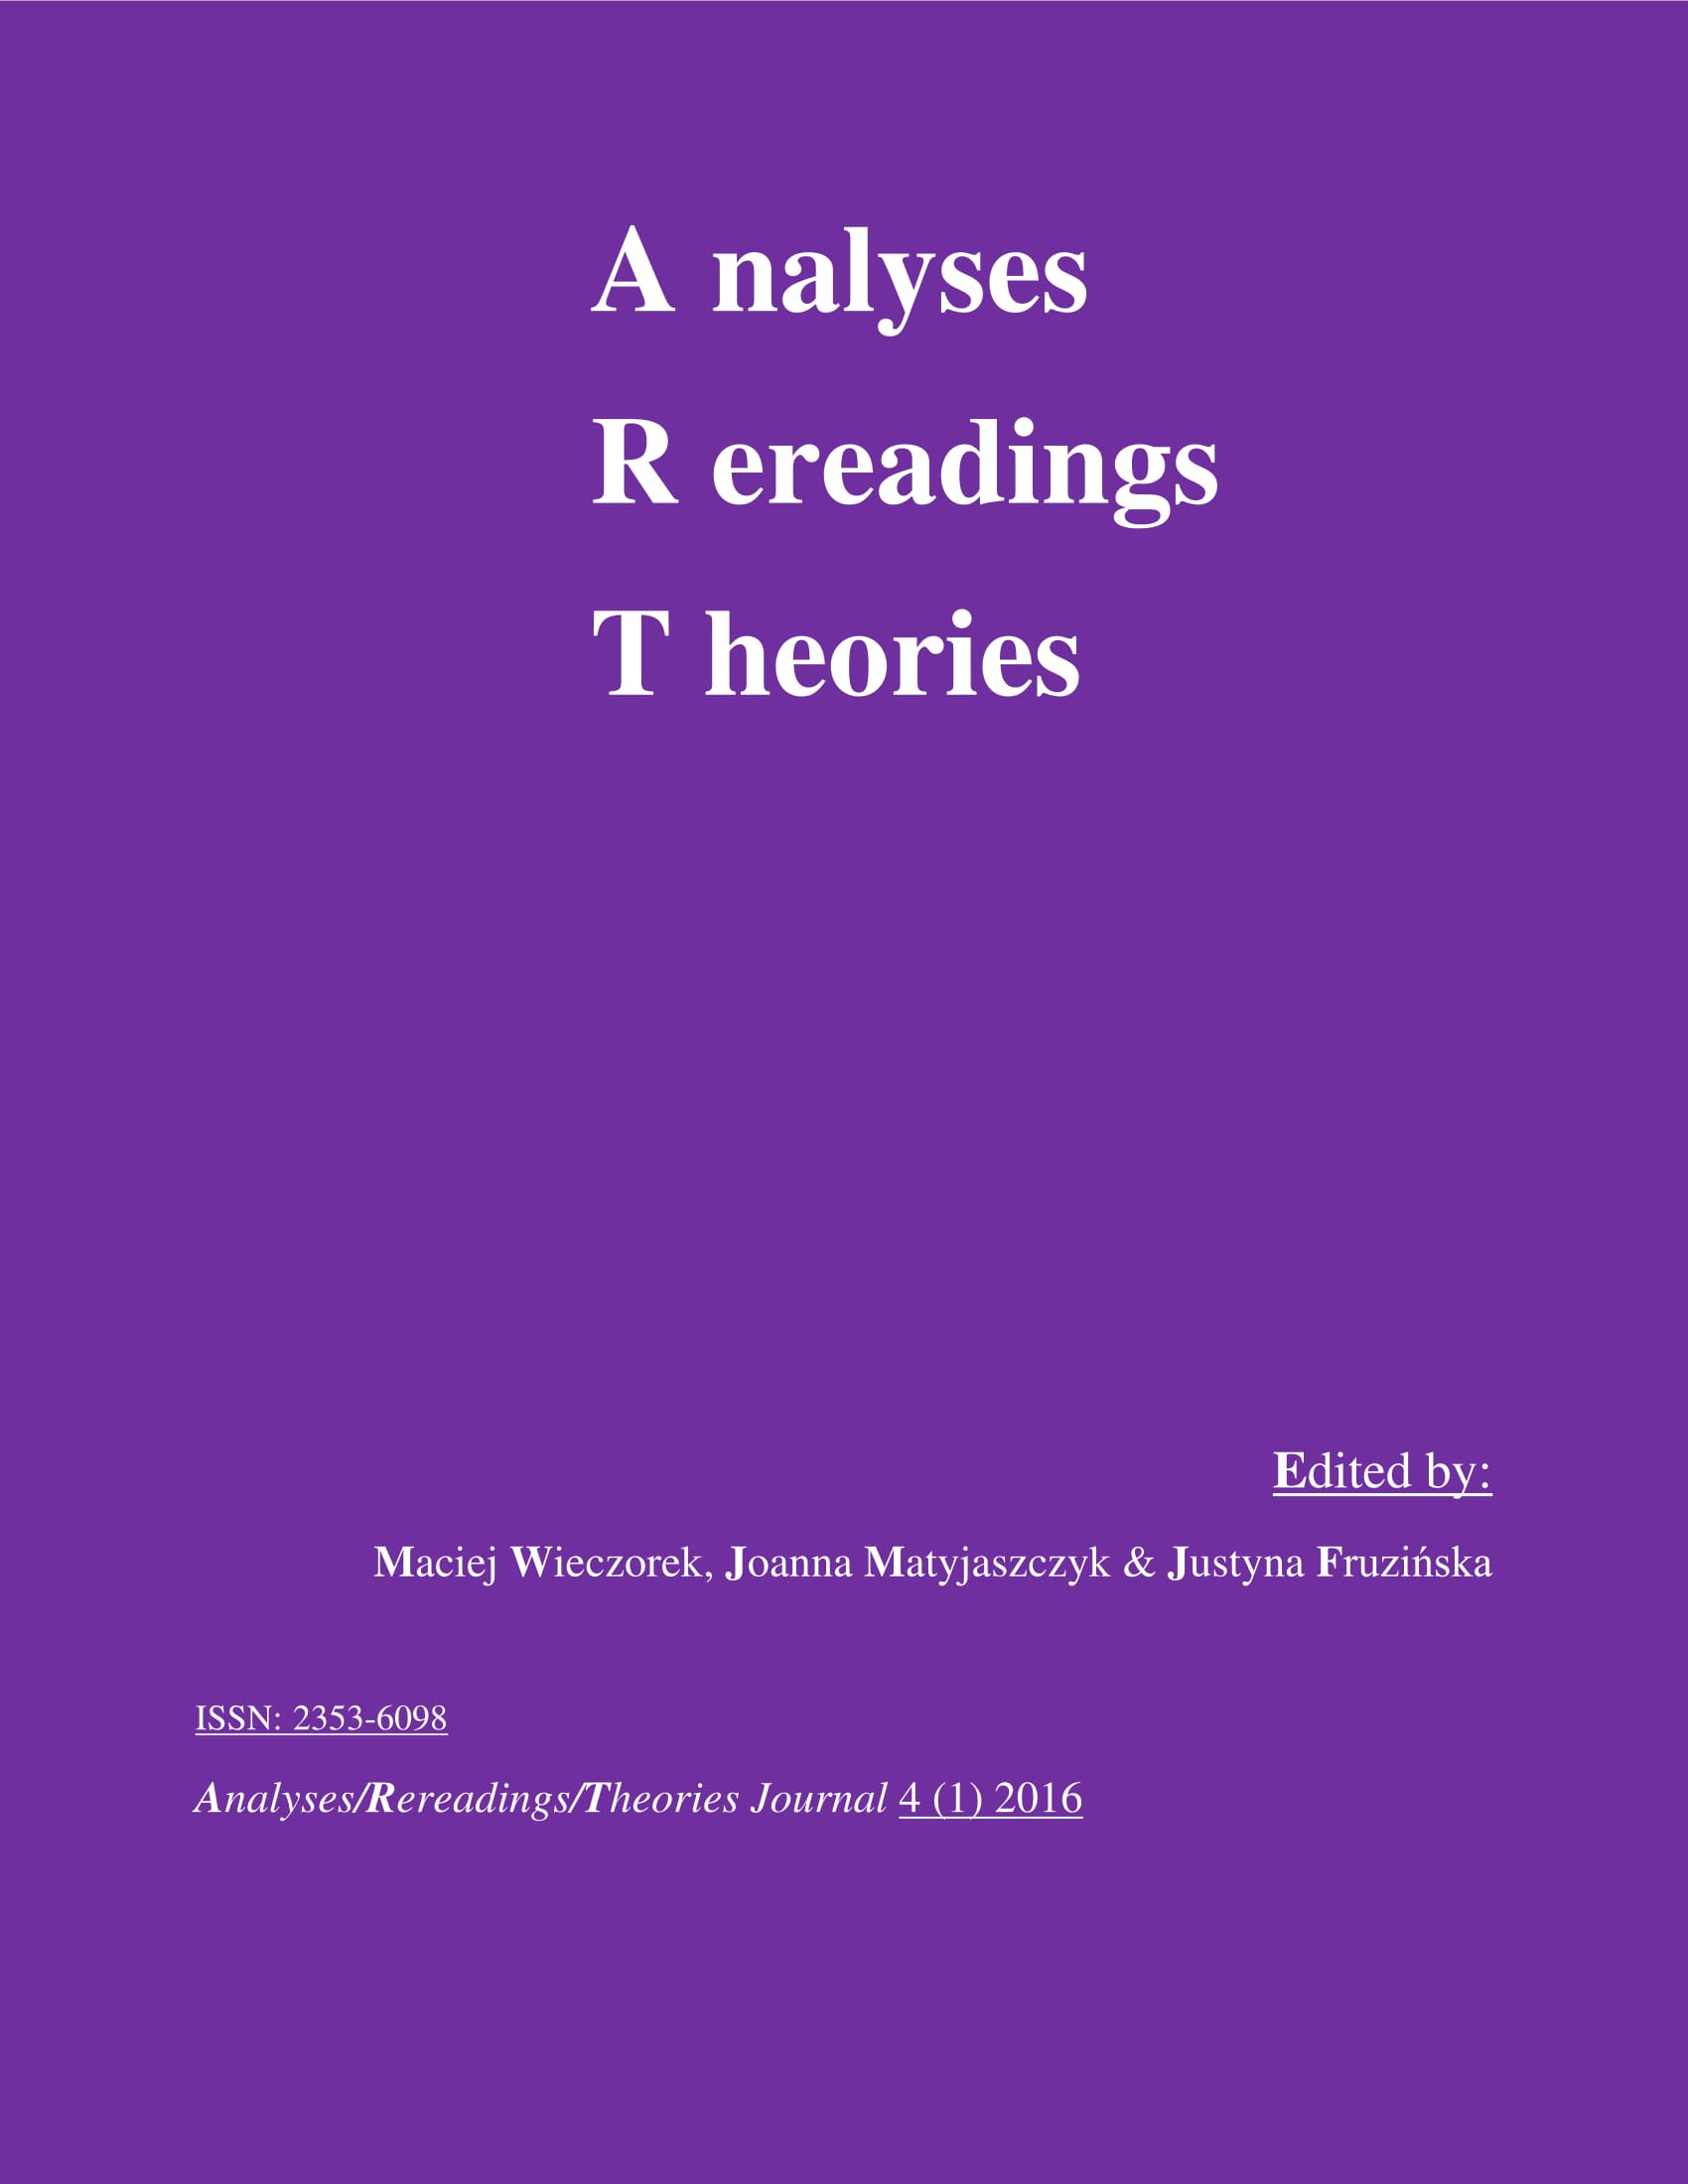 Analyses/Rerearings/Theories (A/R/T) Journal Cover Image